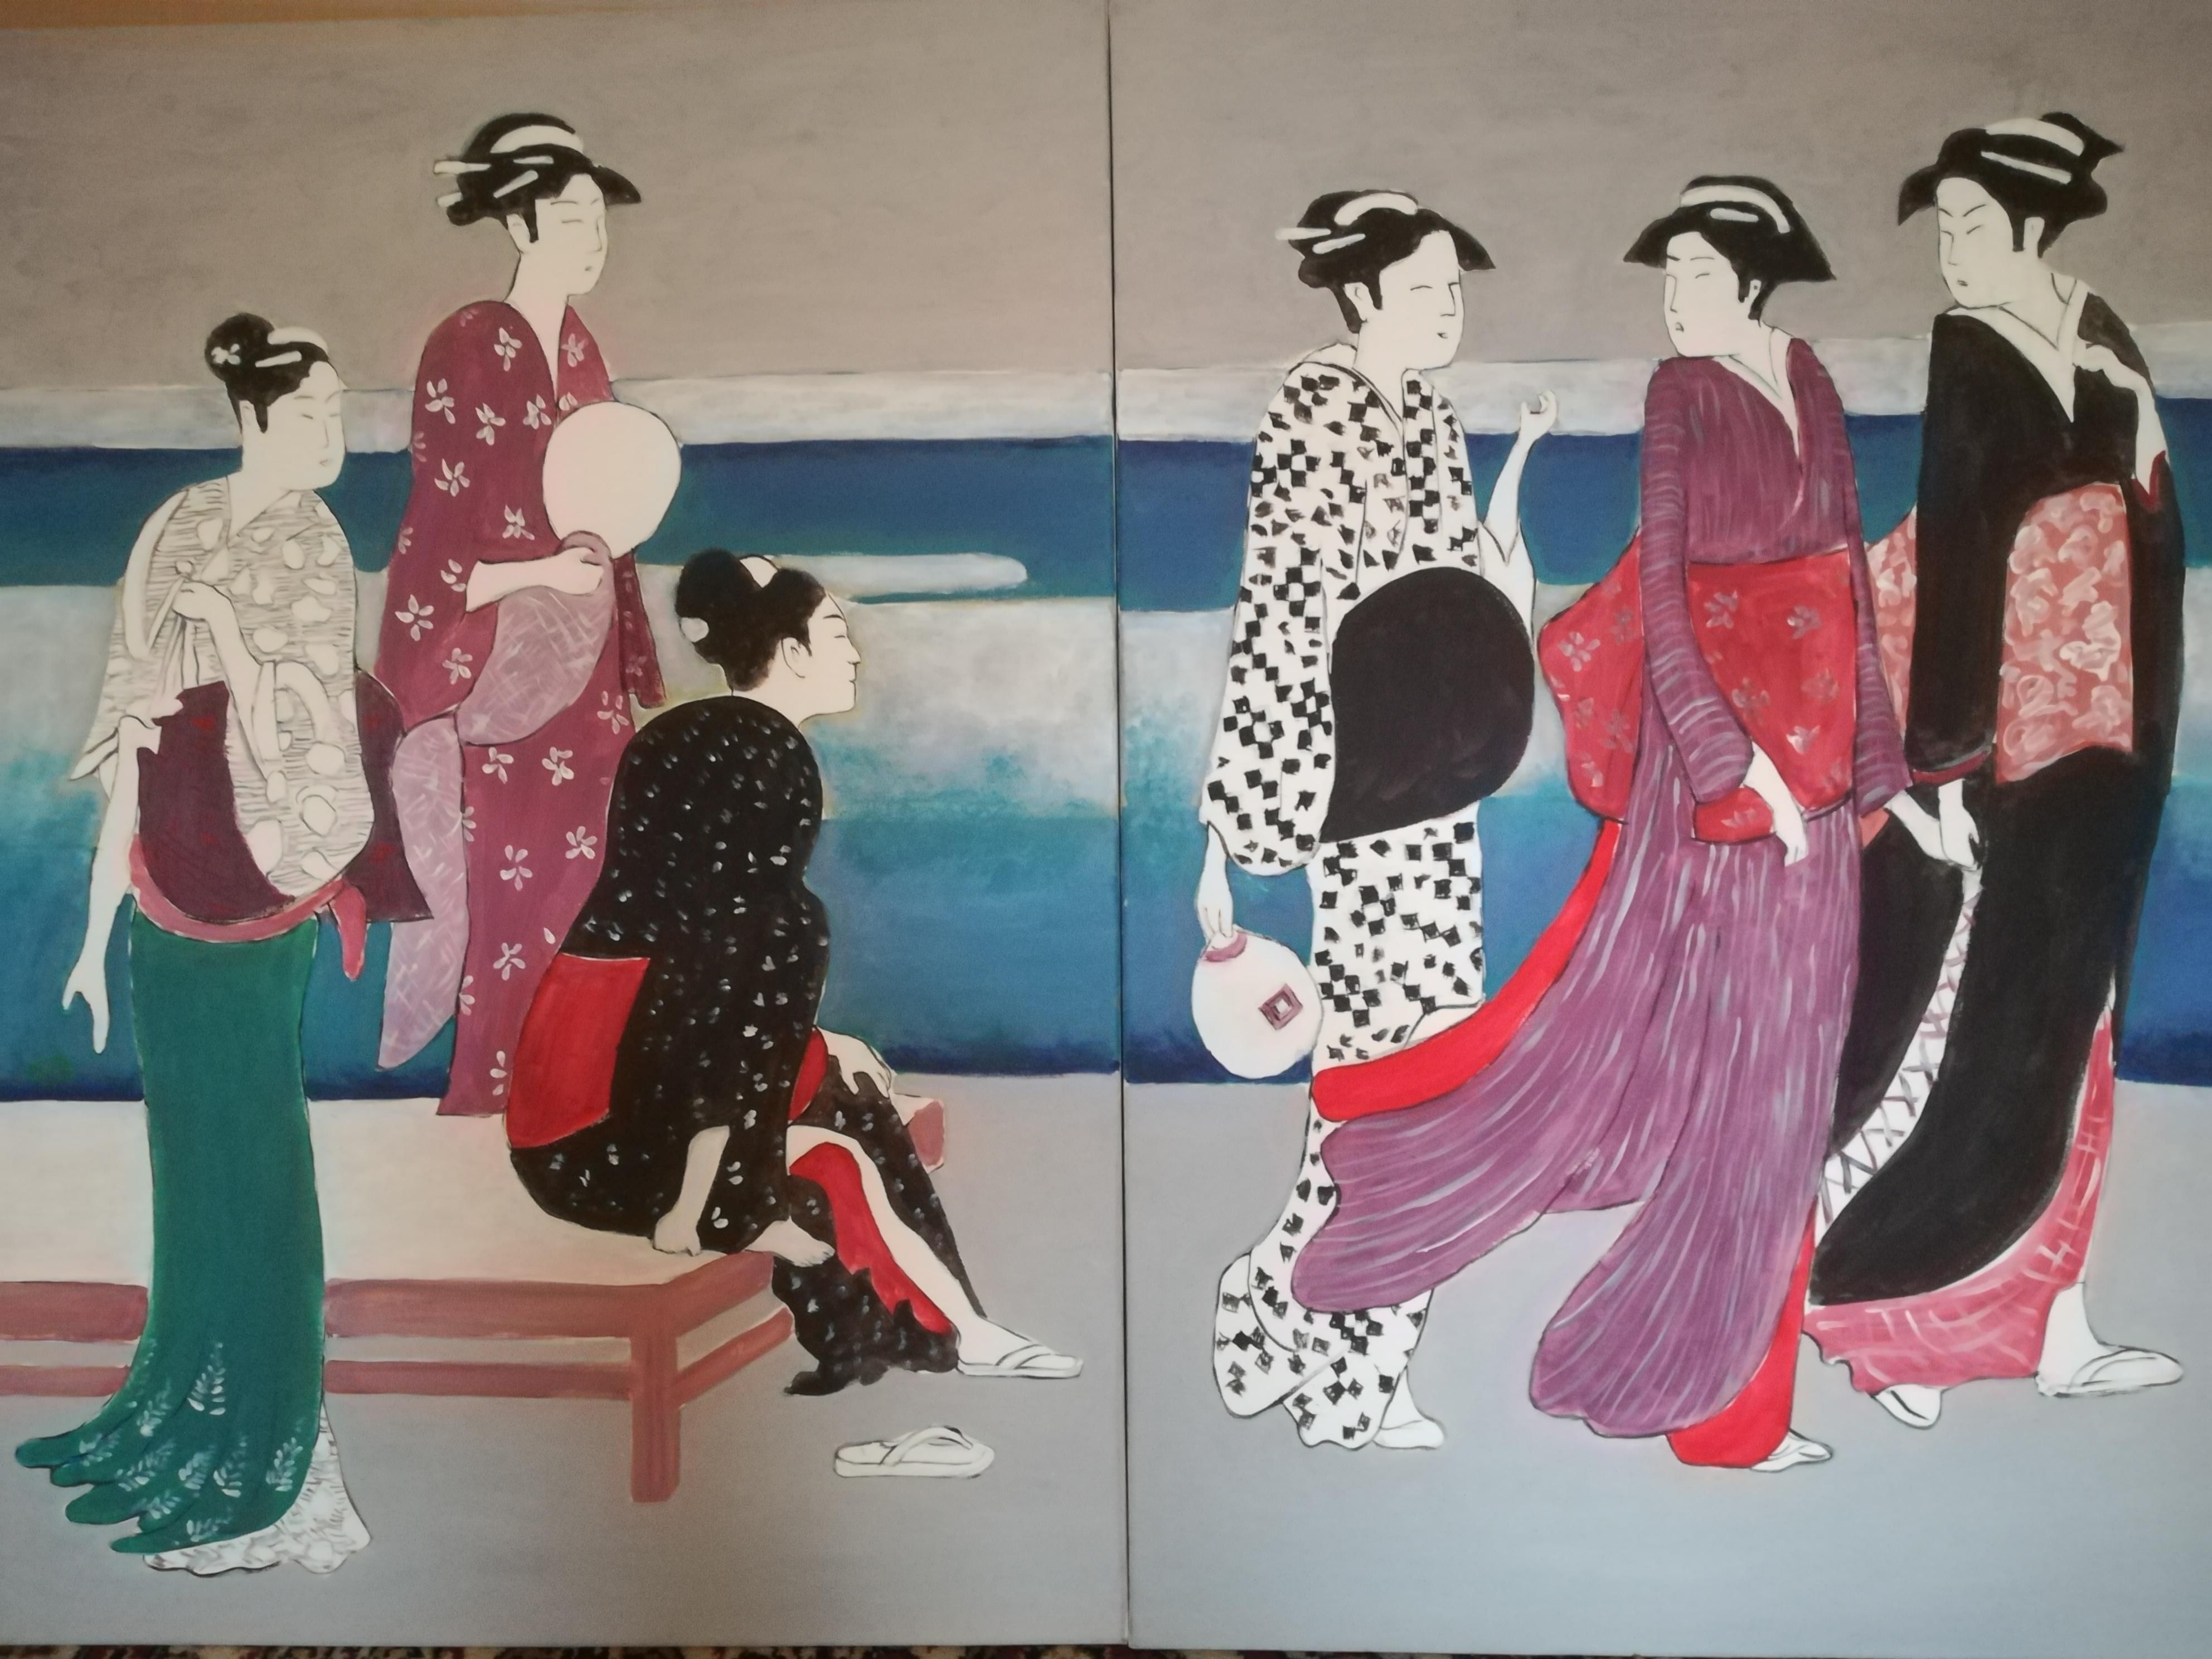 Engraving-diptych Torii Kiyonagi "Beauties walking along the river's bank" turns into a triptych "Van Gogh's arrival in Japan. With friends